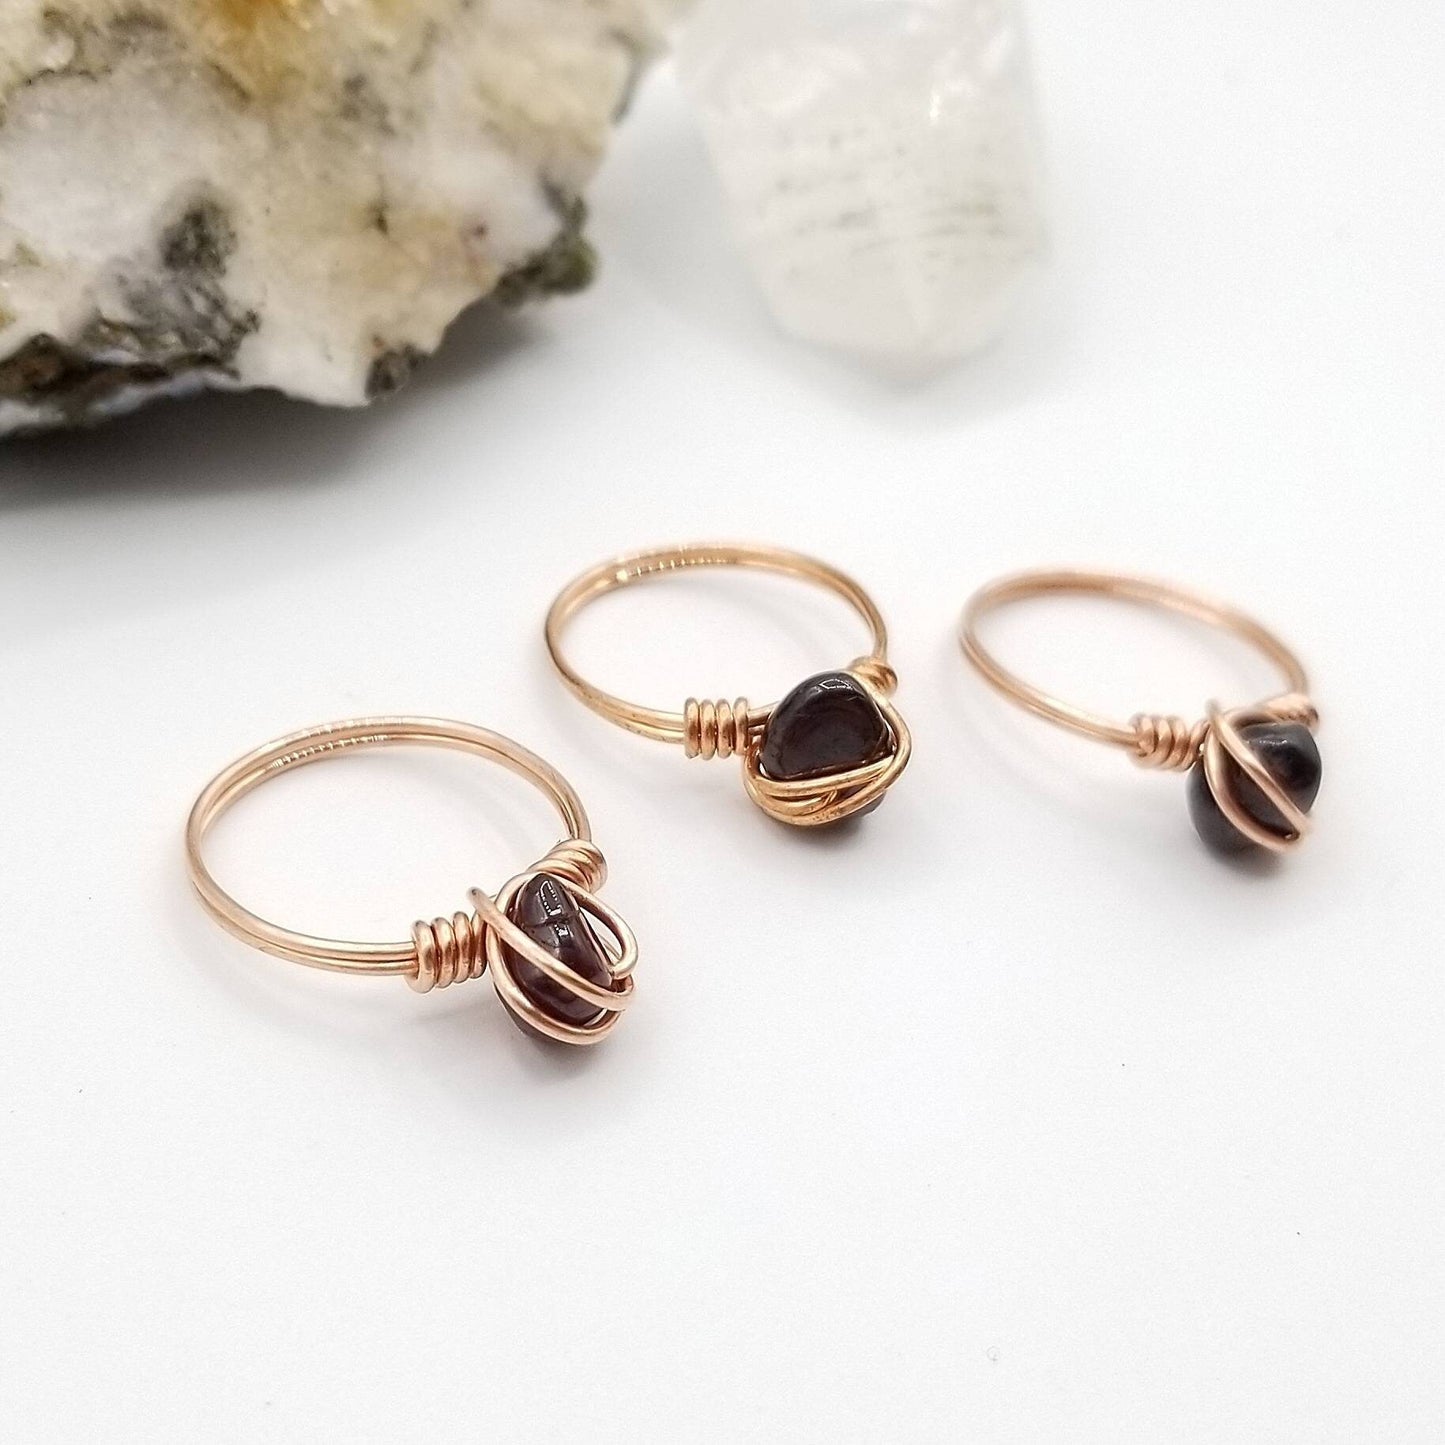 Garnet Ring, Copper Wire Wrapped Ring, January Birthstone, January Necklace